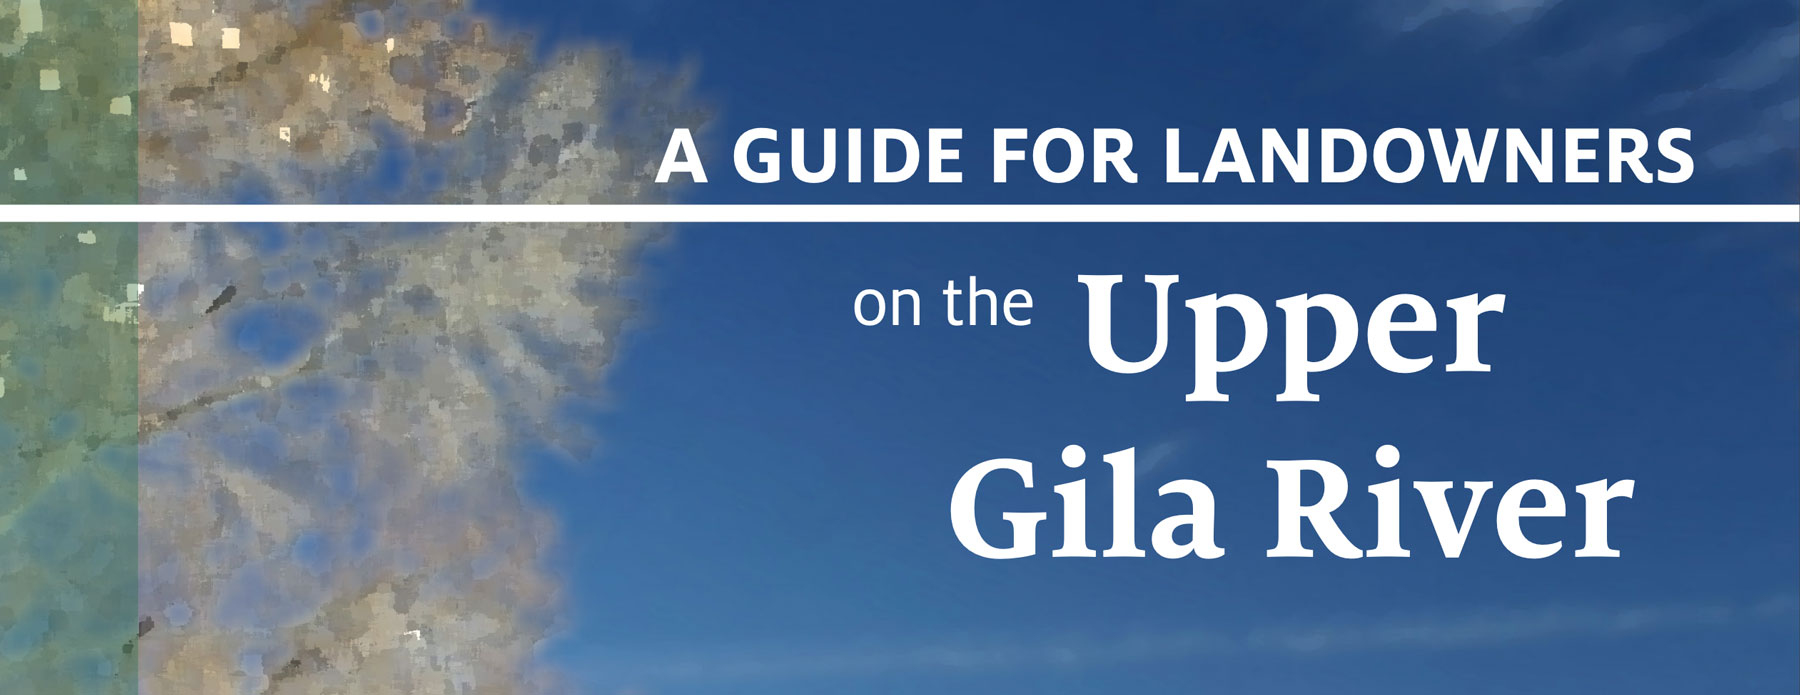 guide for landowners on the upper gila river cropped cover image showing sky and trees